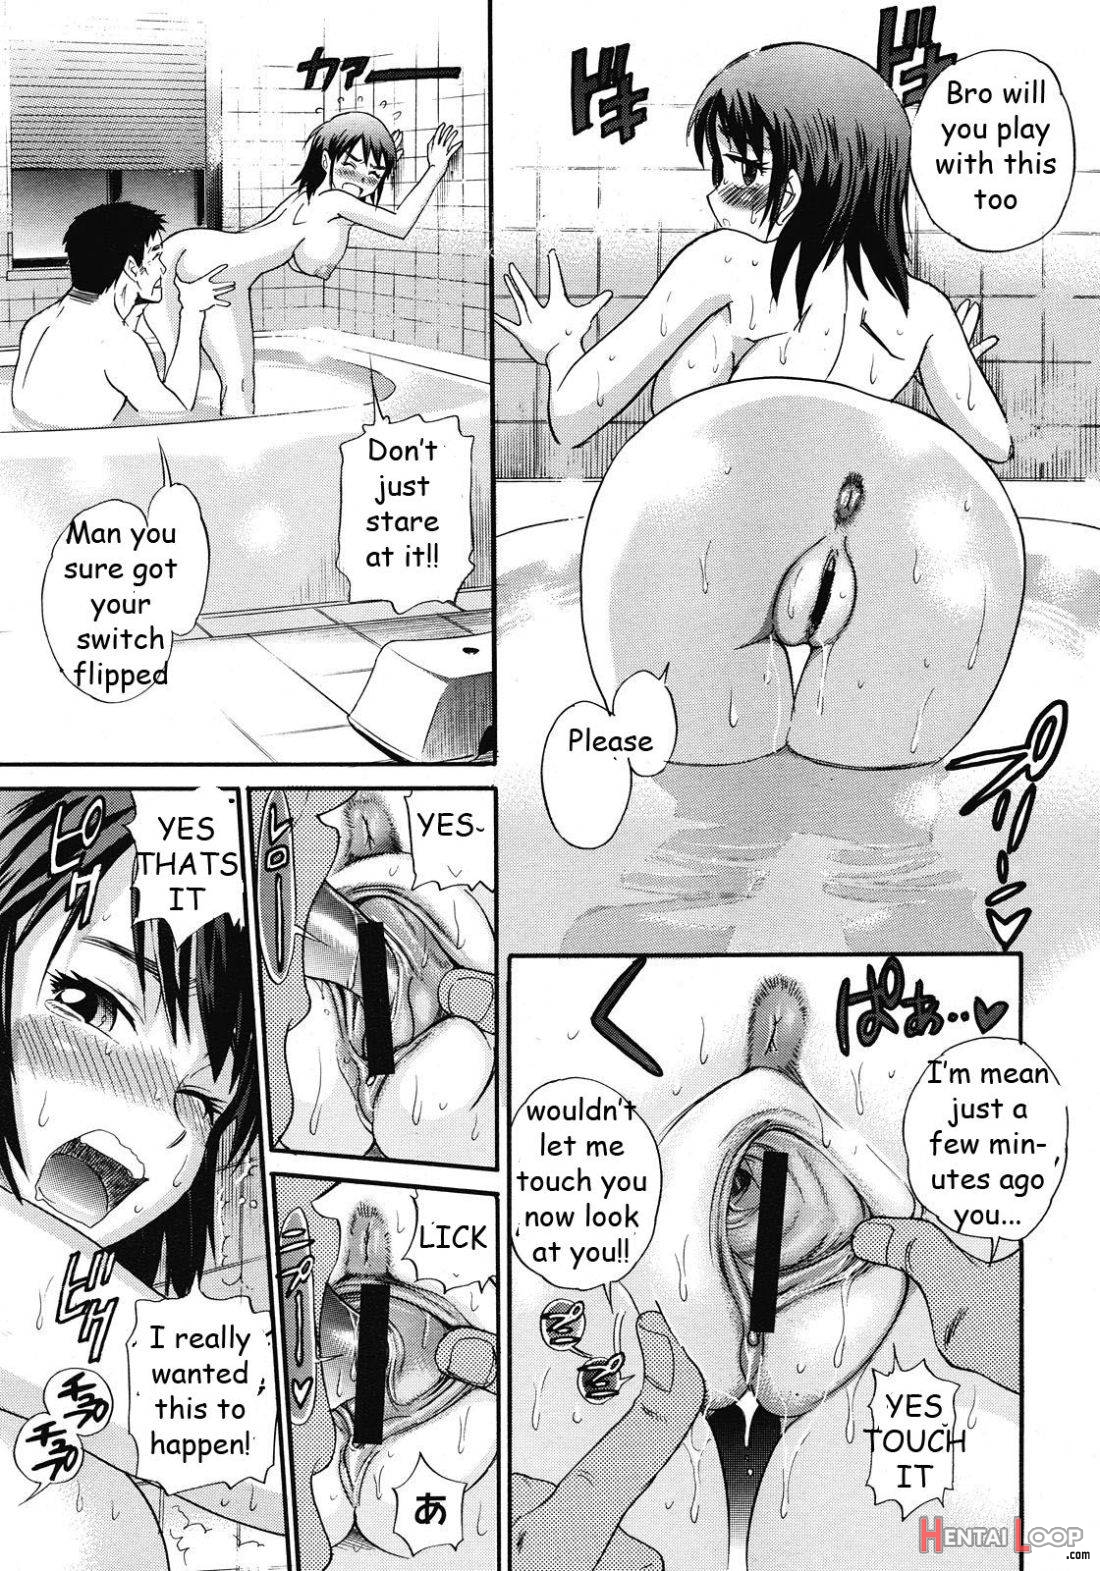 Fun in the Tub with Sis page 7